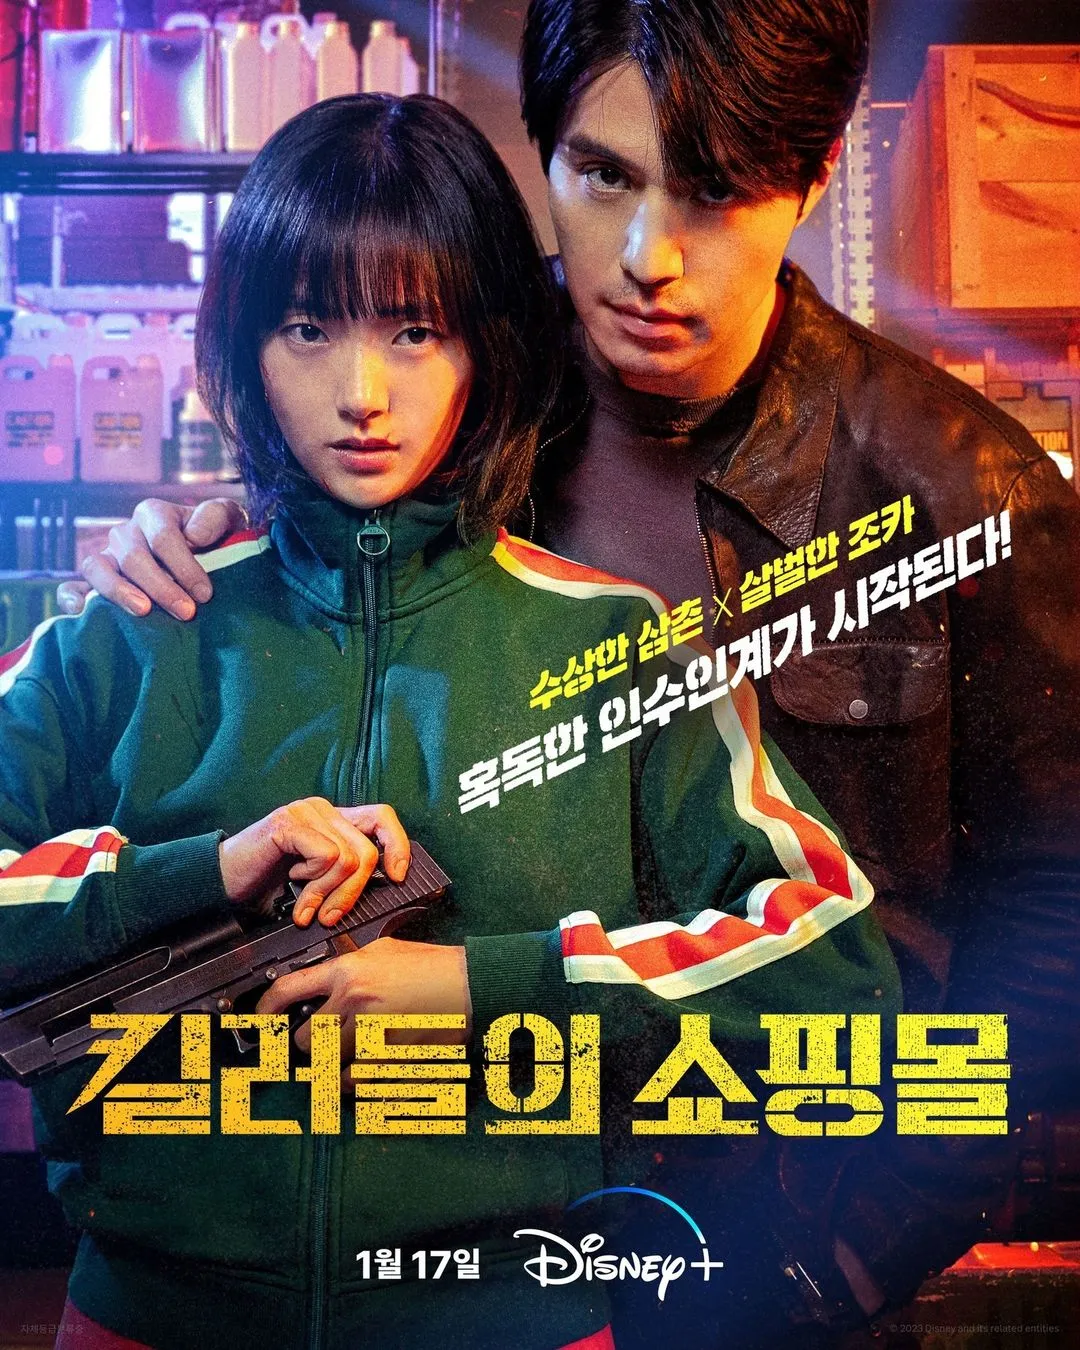 K-drama to watch A shop for killers image curtesy of Asianwiki. https://asianwiki.com/File:A_Shop_for_Killers-mp1.jpeg